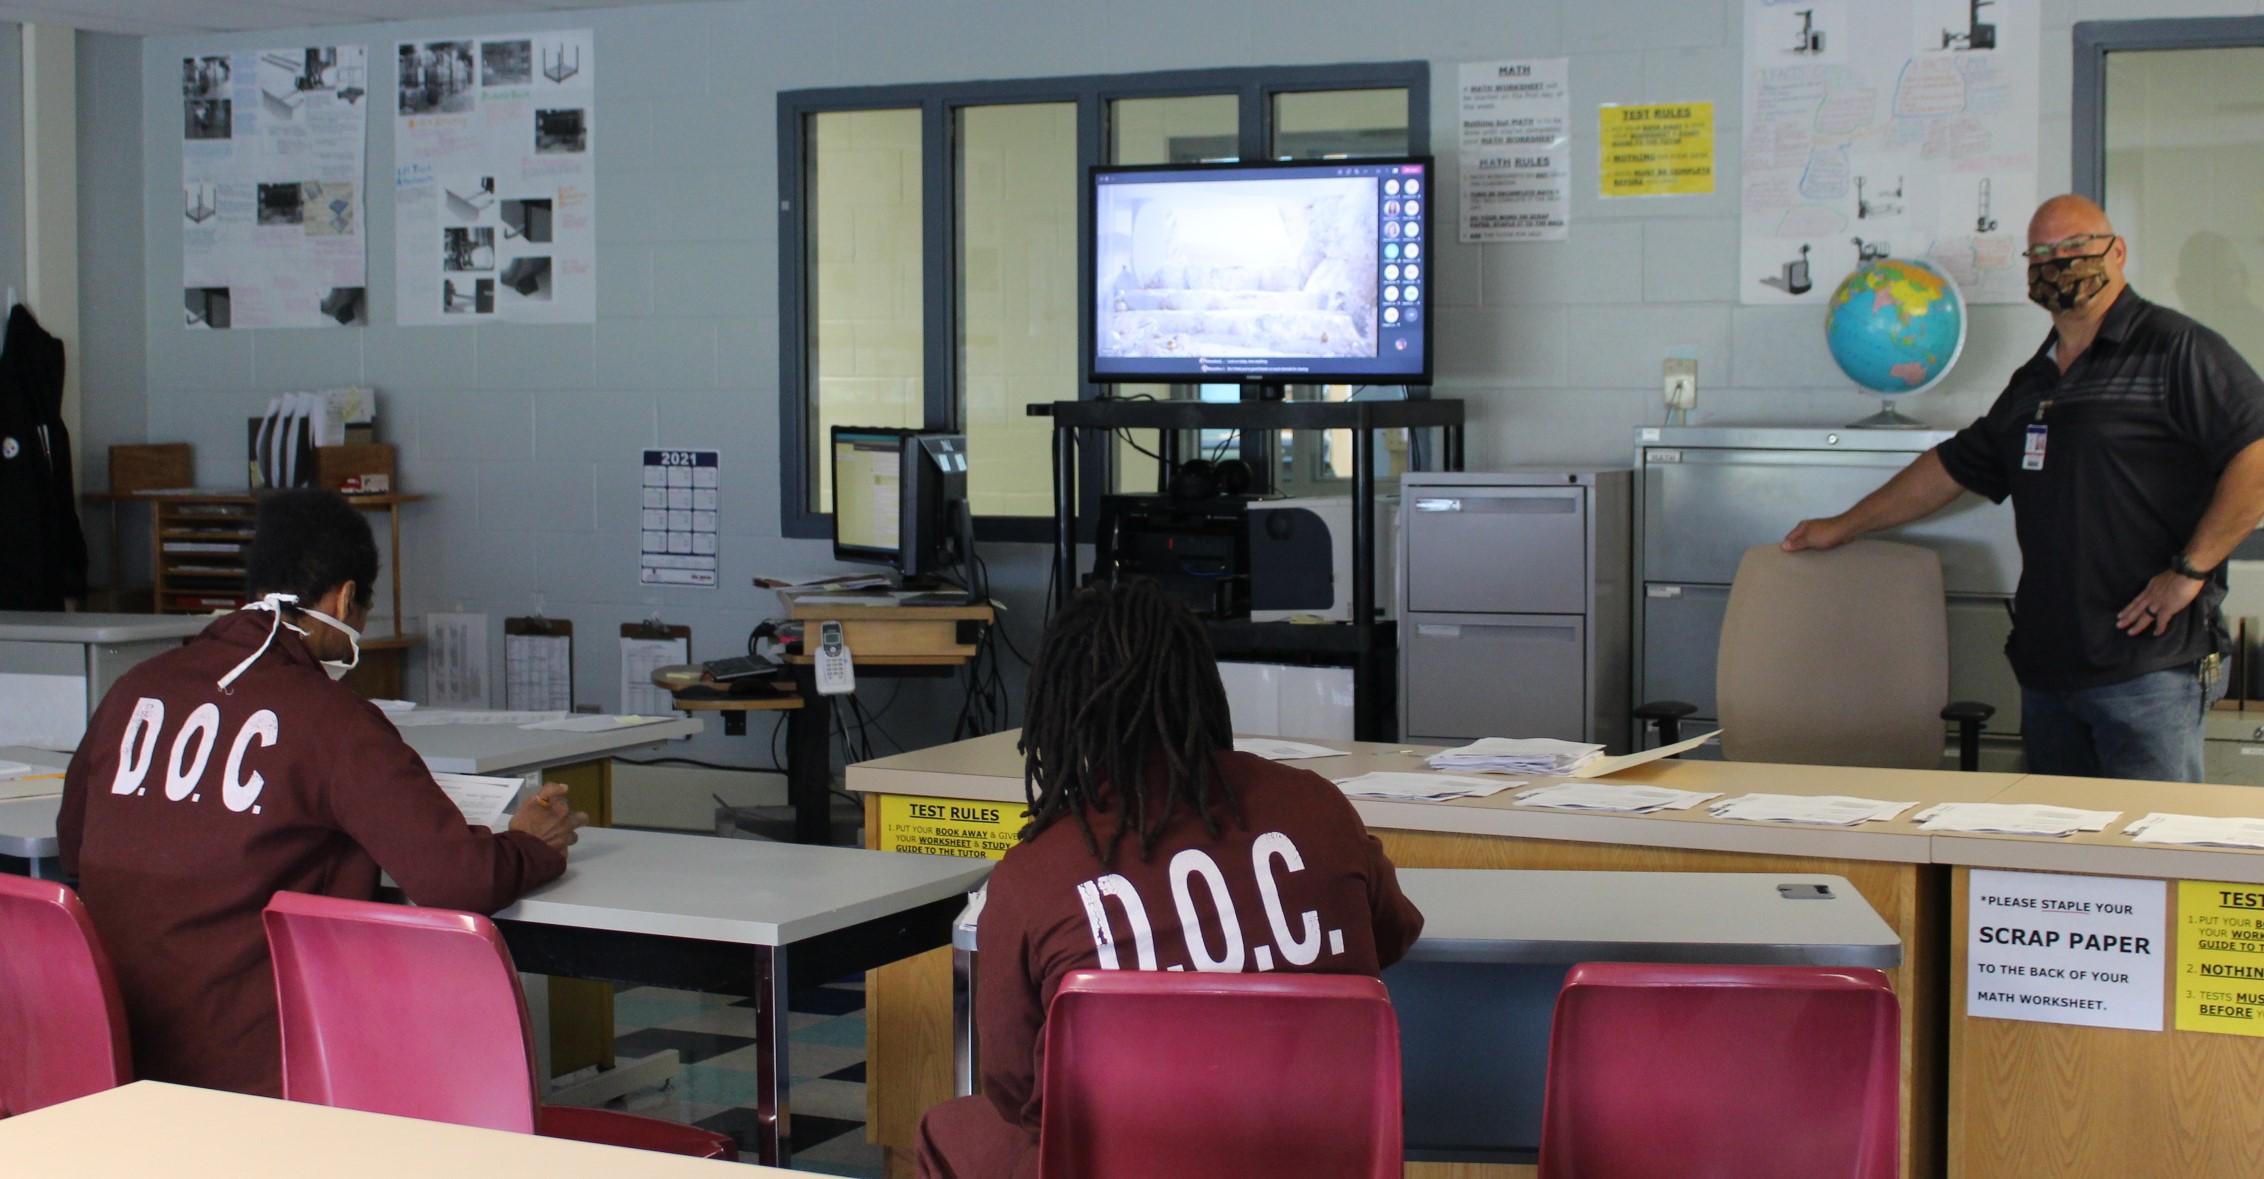 Two inmates watch a virtual presentation with an employee standing by observing